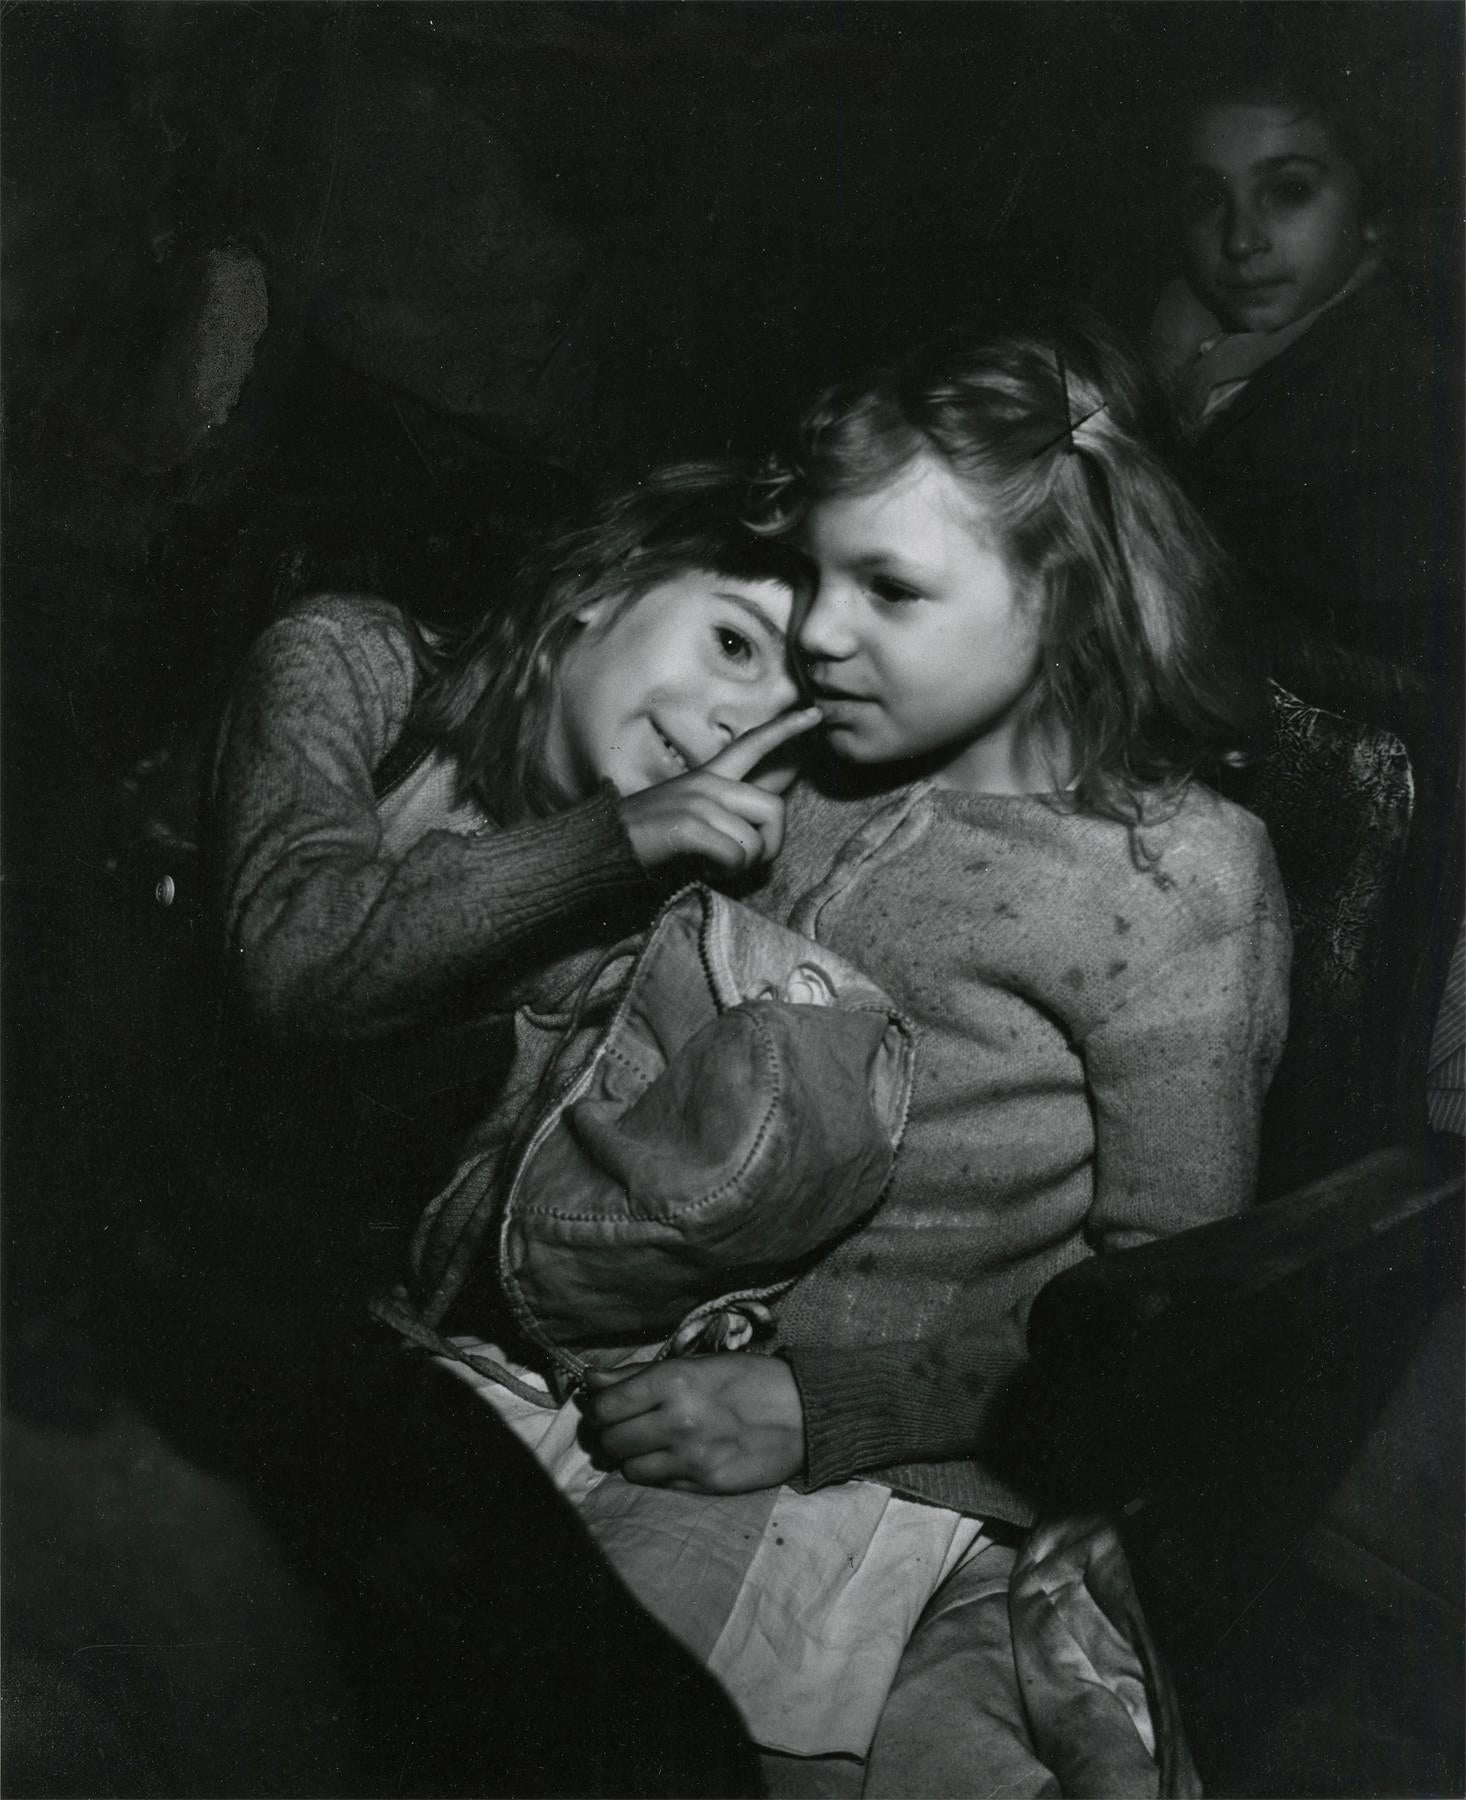 Weegee Black and White Photograph - Children's Performance